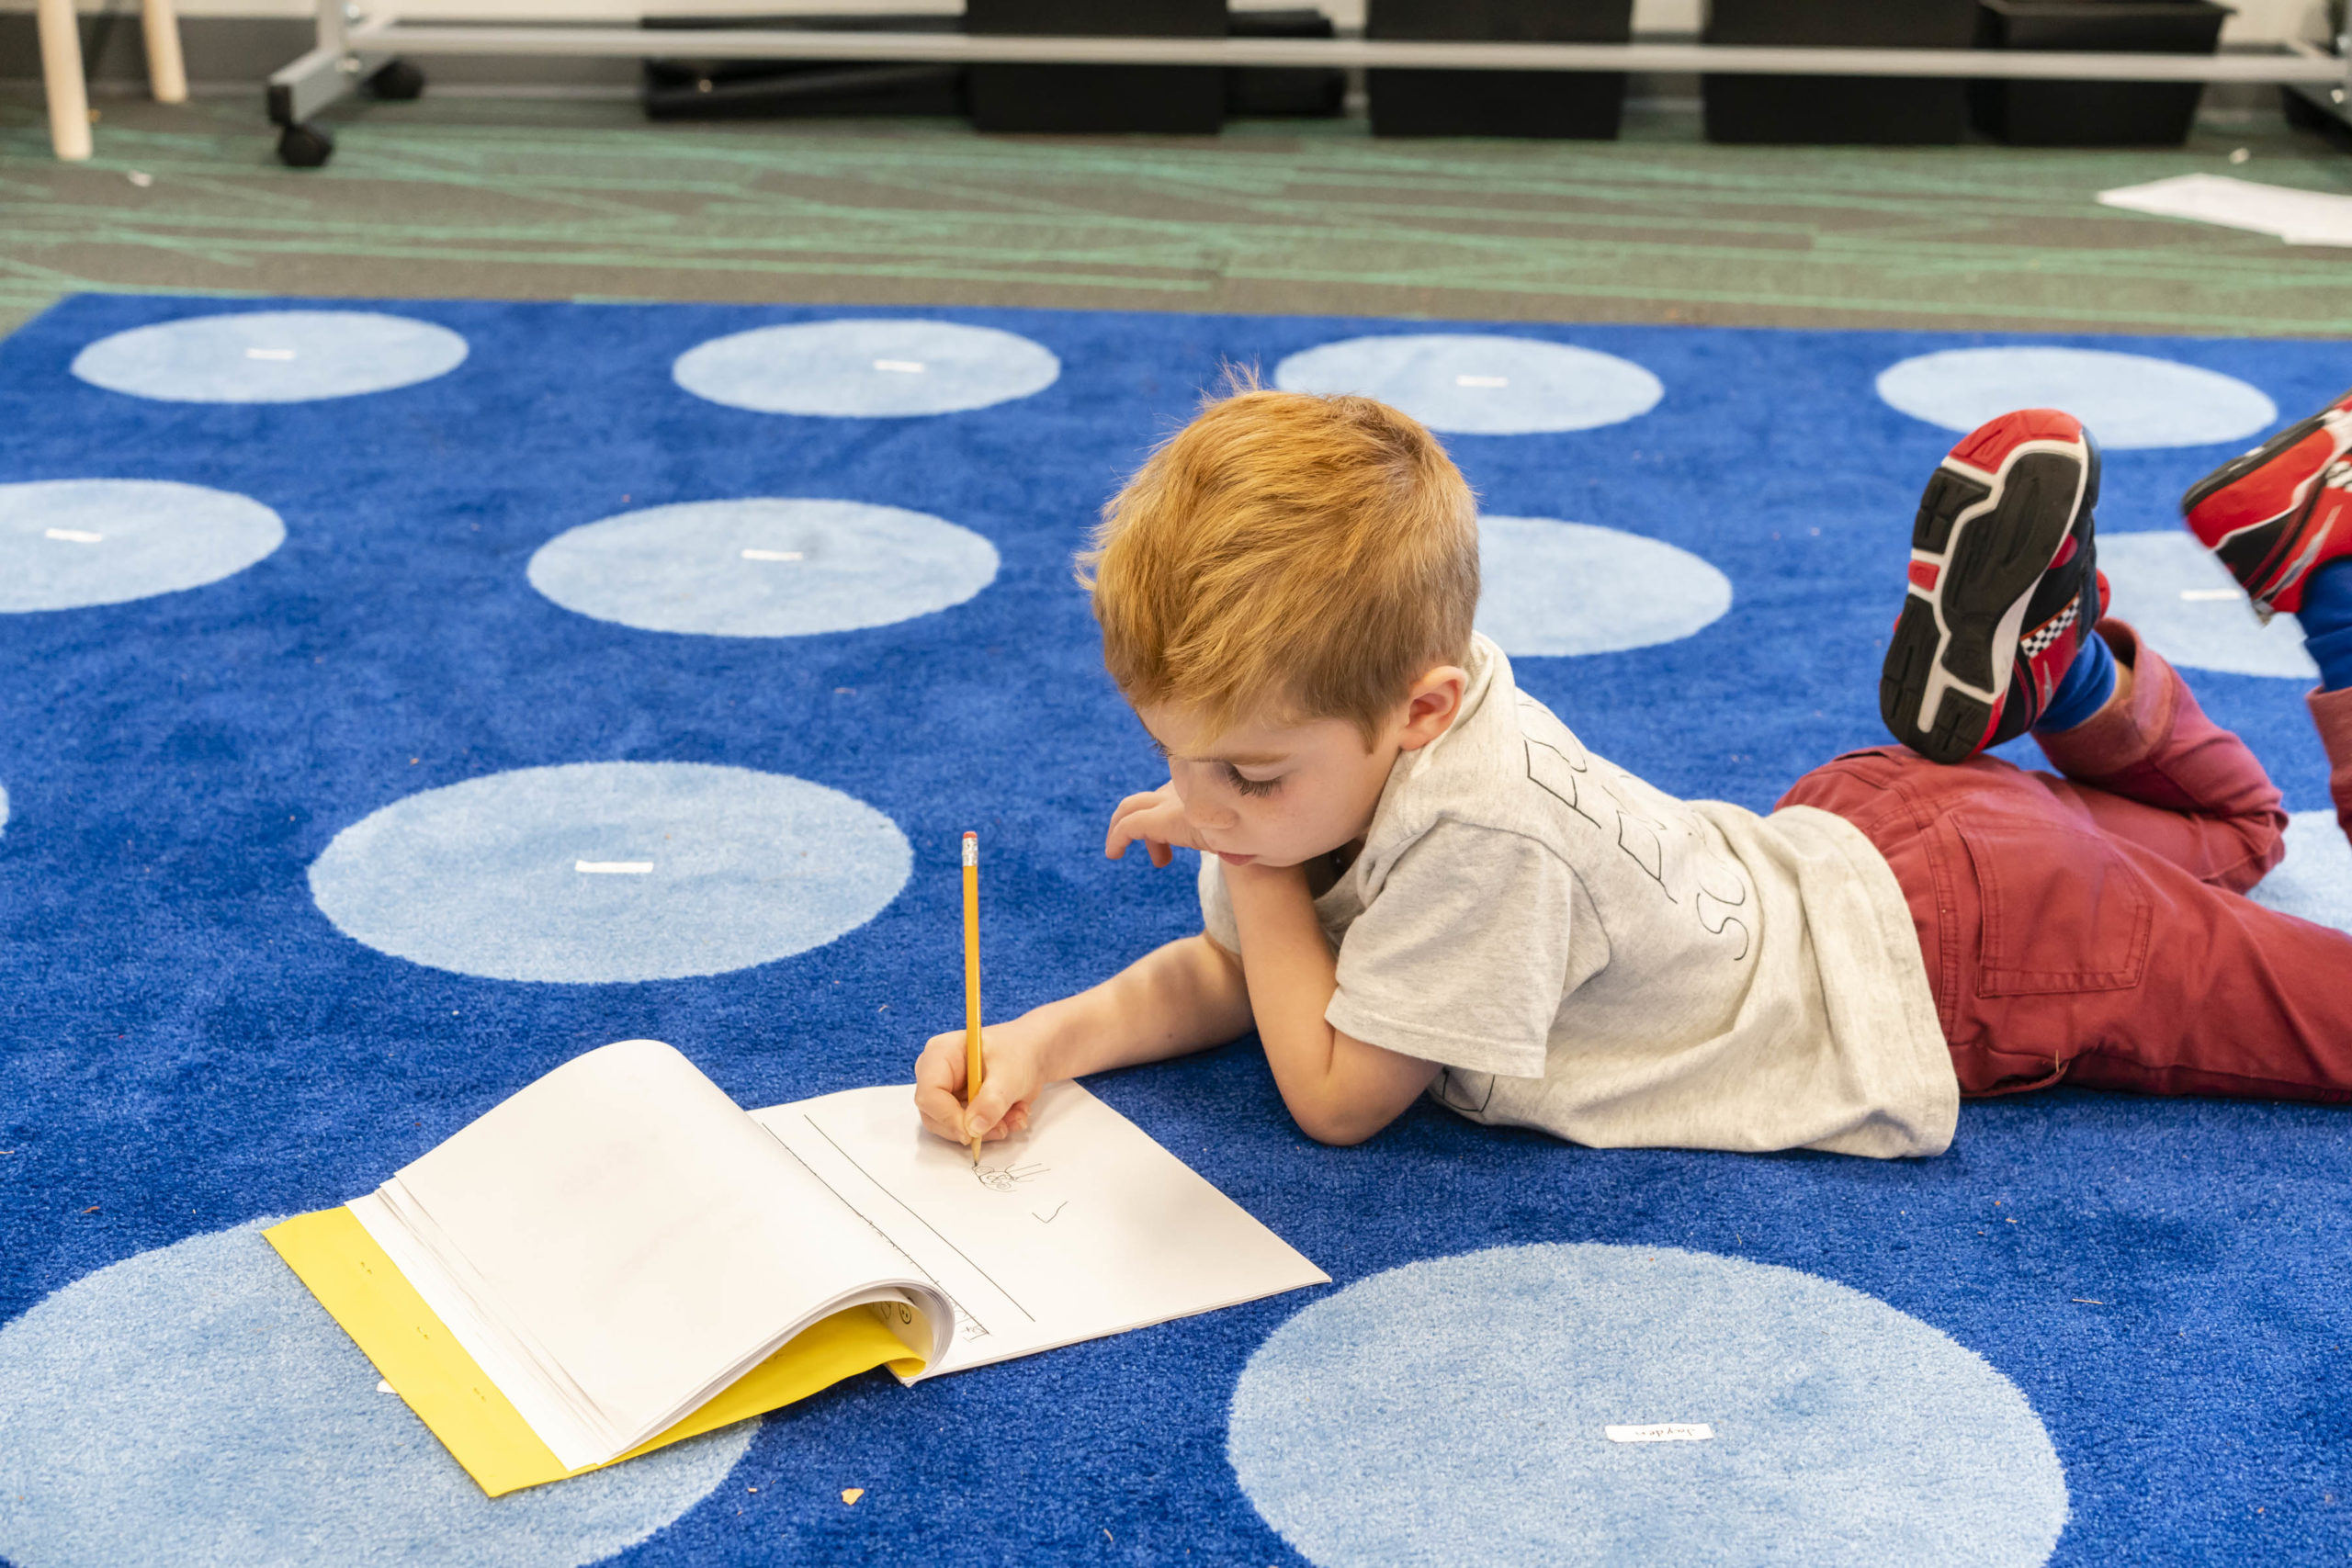 A student lays down on a blue carpet writing